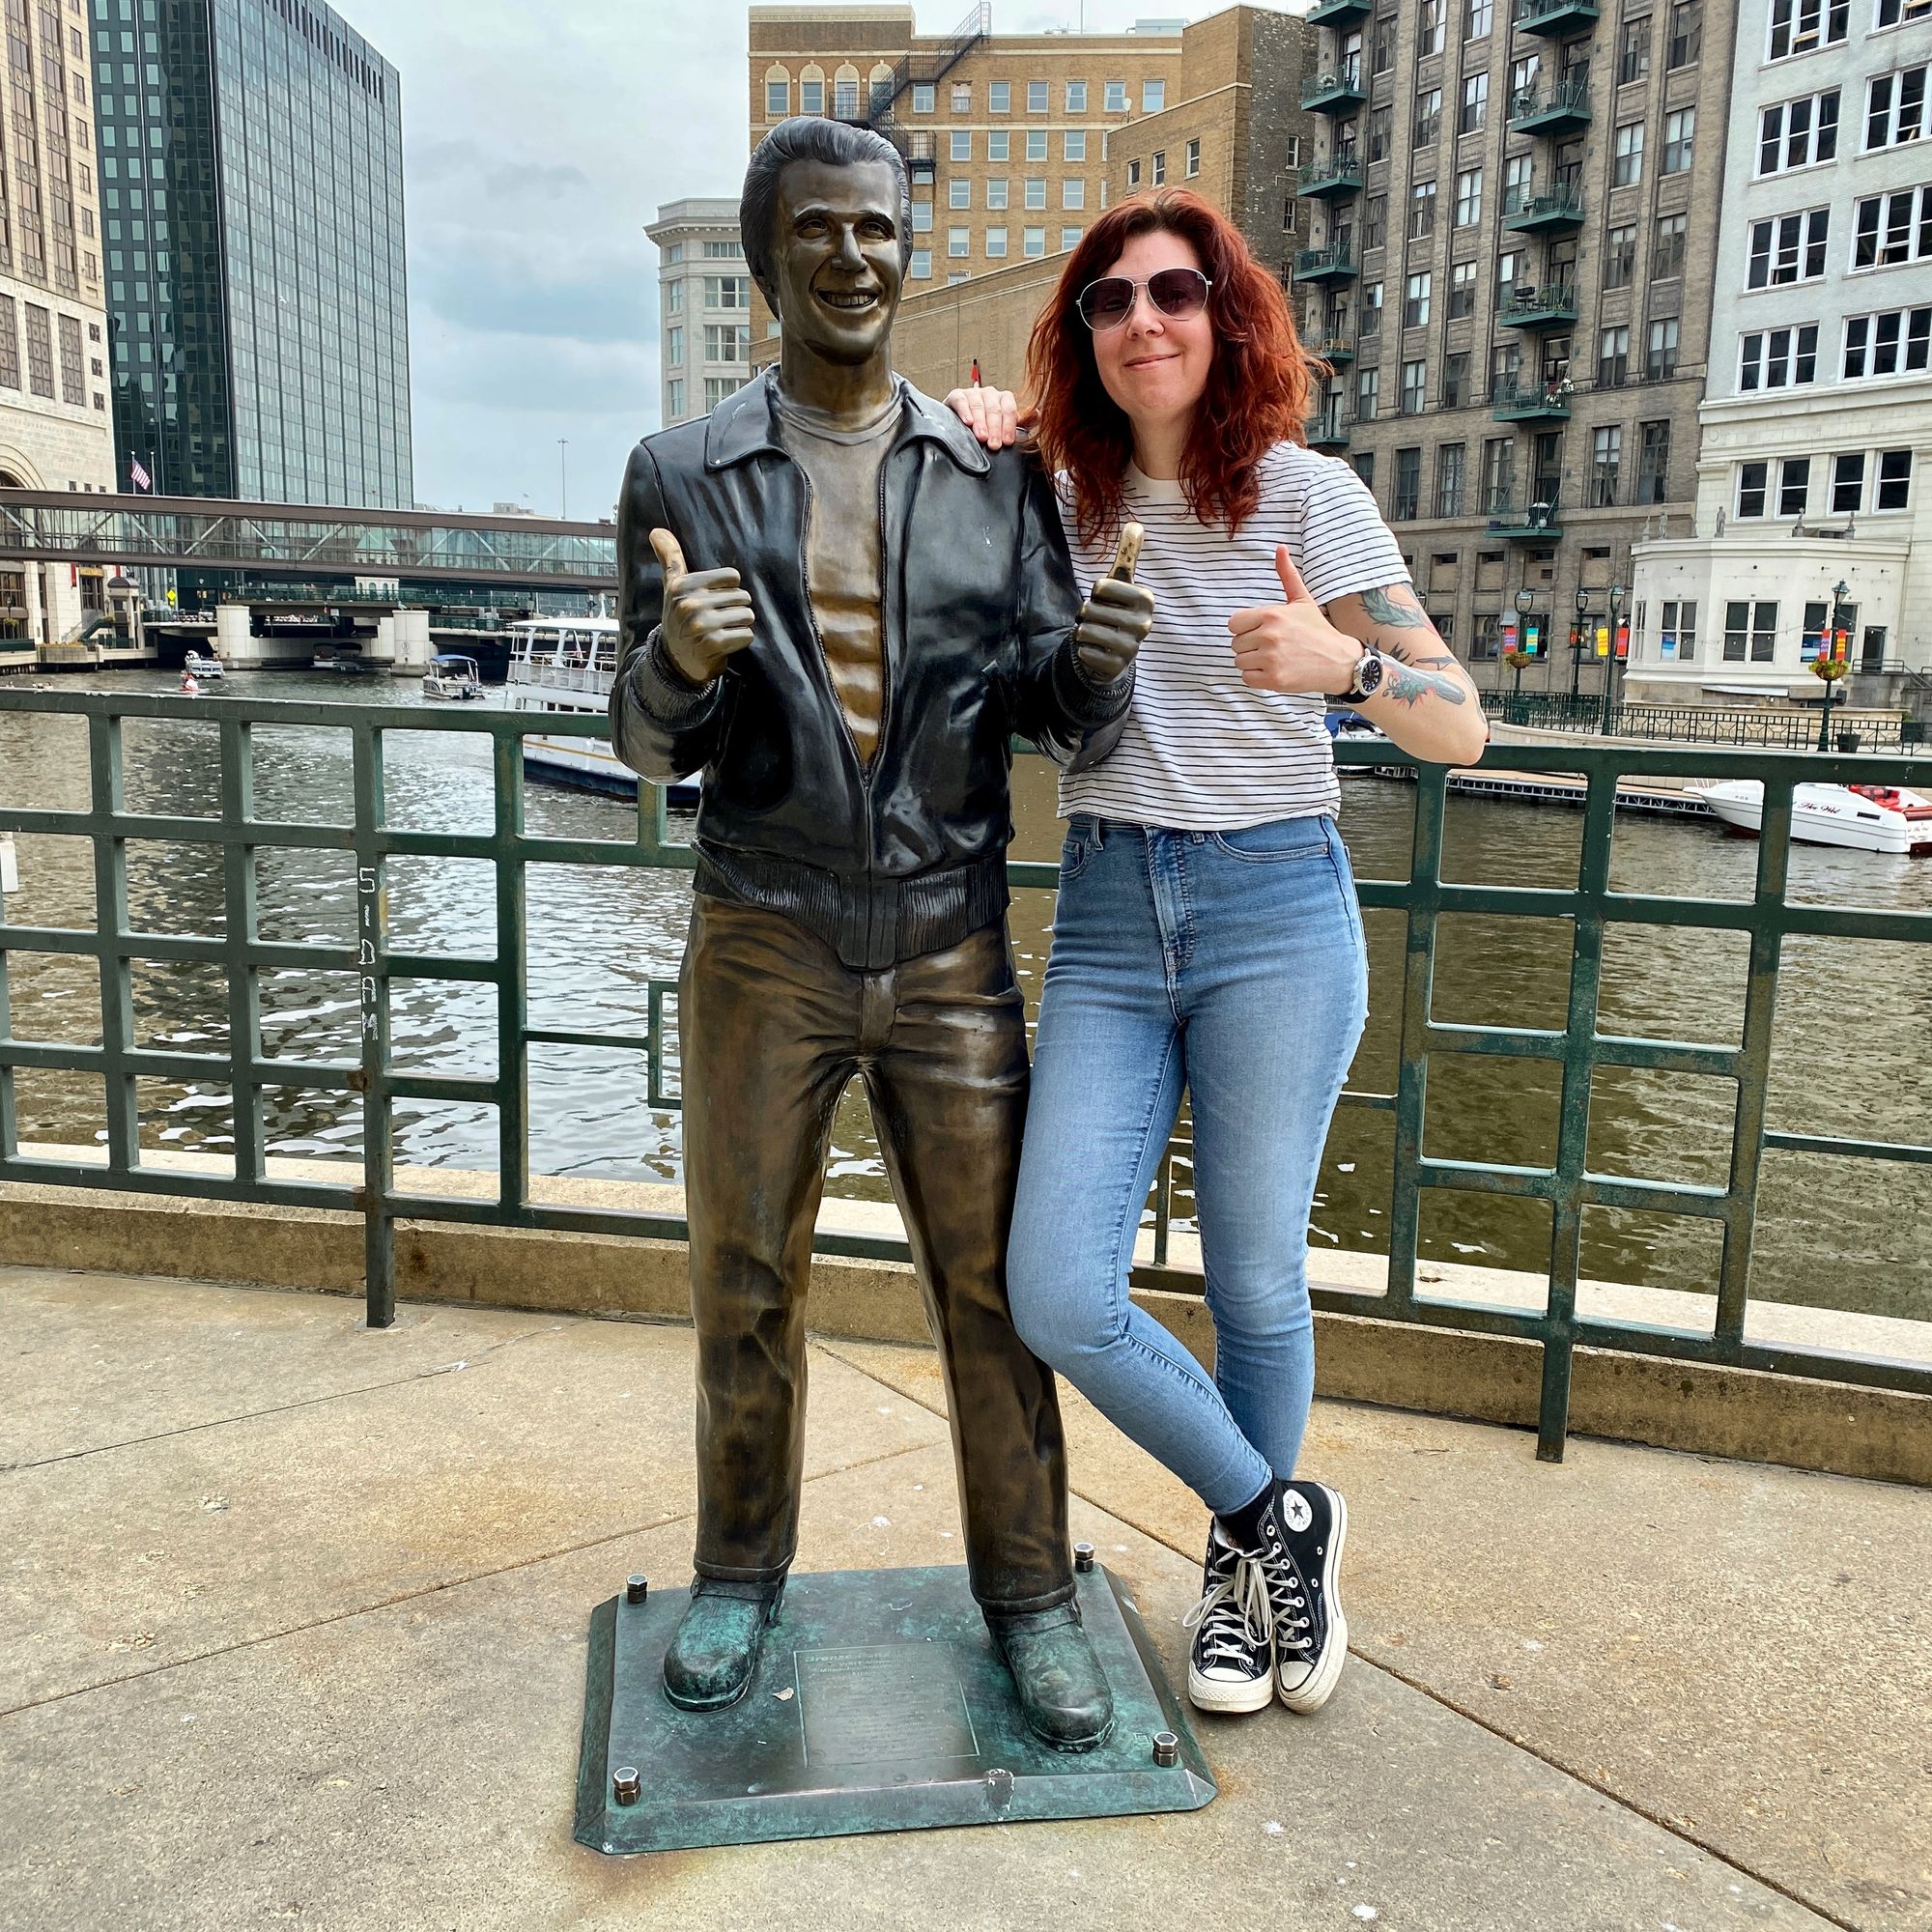 A white woman with long dark reddish-brown hair wearing blue jeans, striped t-shirt and black Converse stands next to a bronze statue of the Fonz, a man wearing a leather jacket and holding thumbs up, in front of the river in downtown Milwaukee